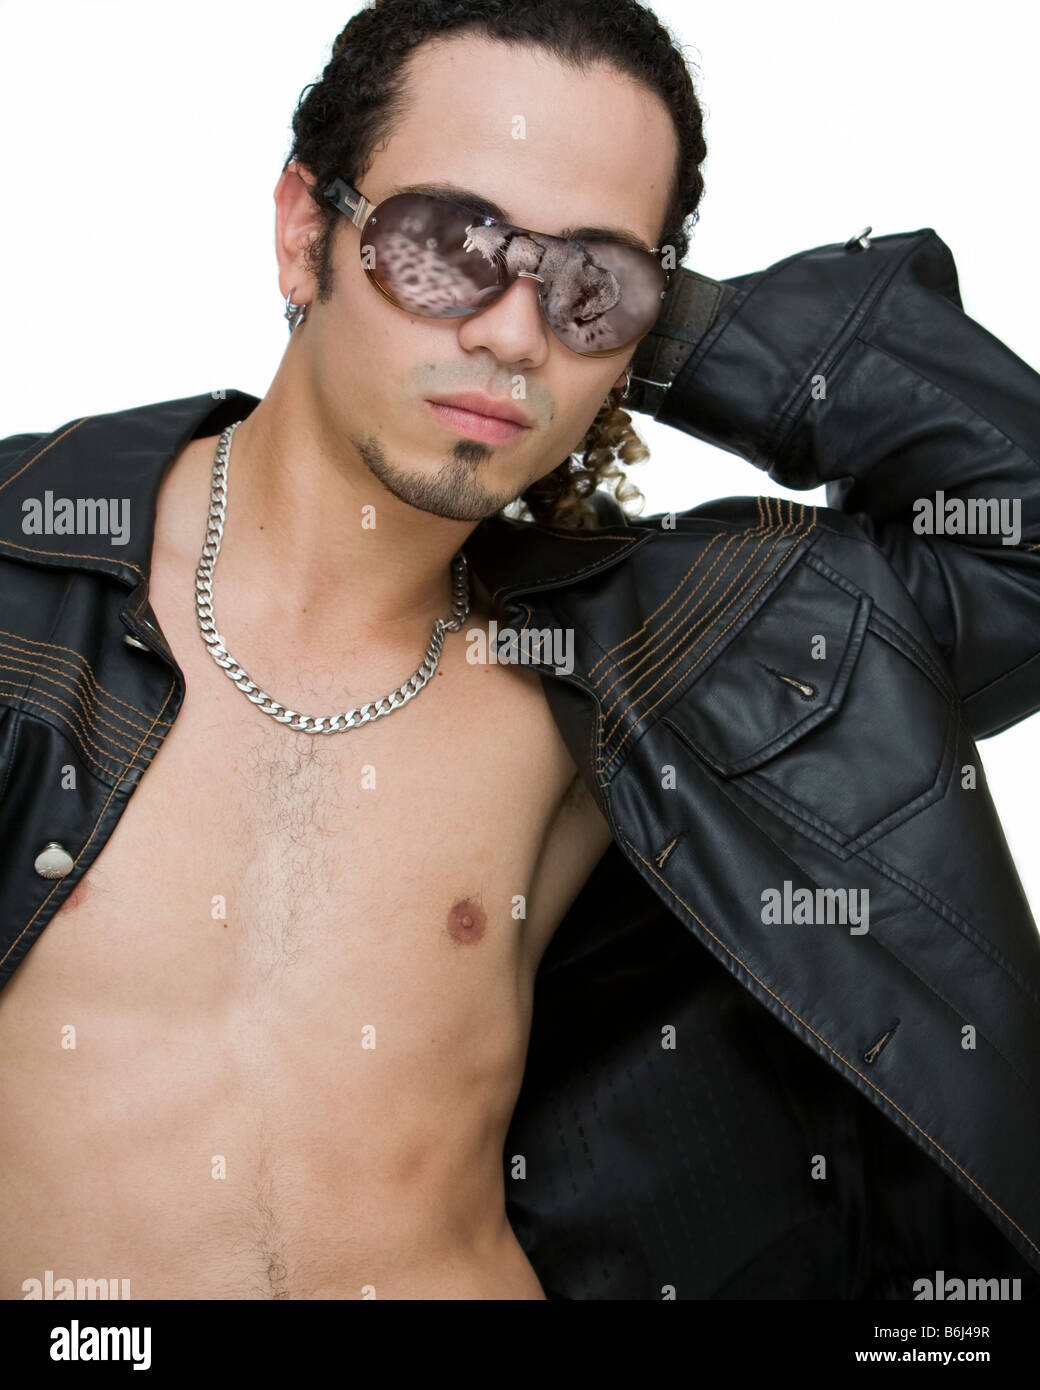 young man modeling sunglasses with a reflection of a cheetah with its mouth open Stock Photo